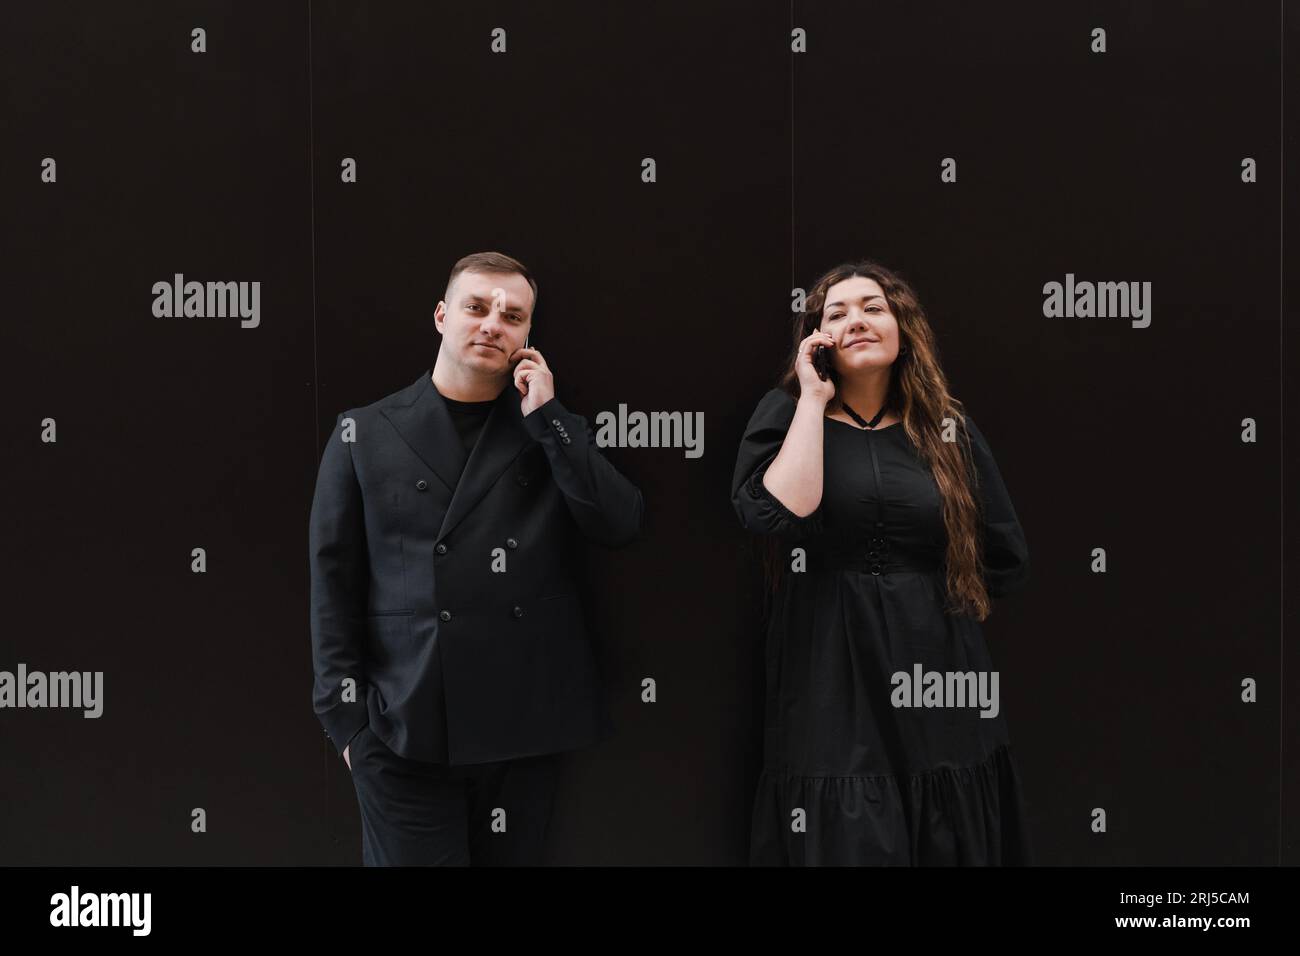 Young lovers woman and man in black clothes listen to audio message Stock Photo